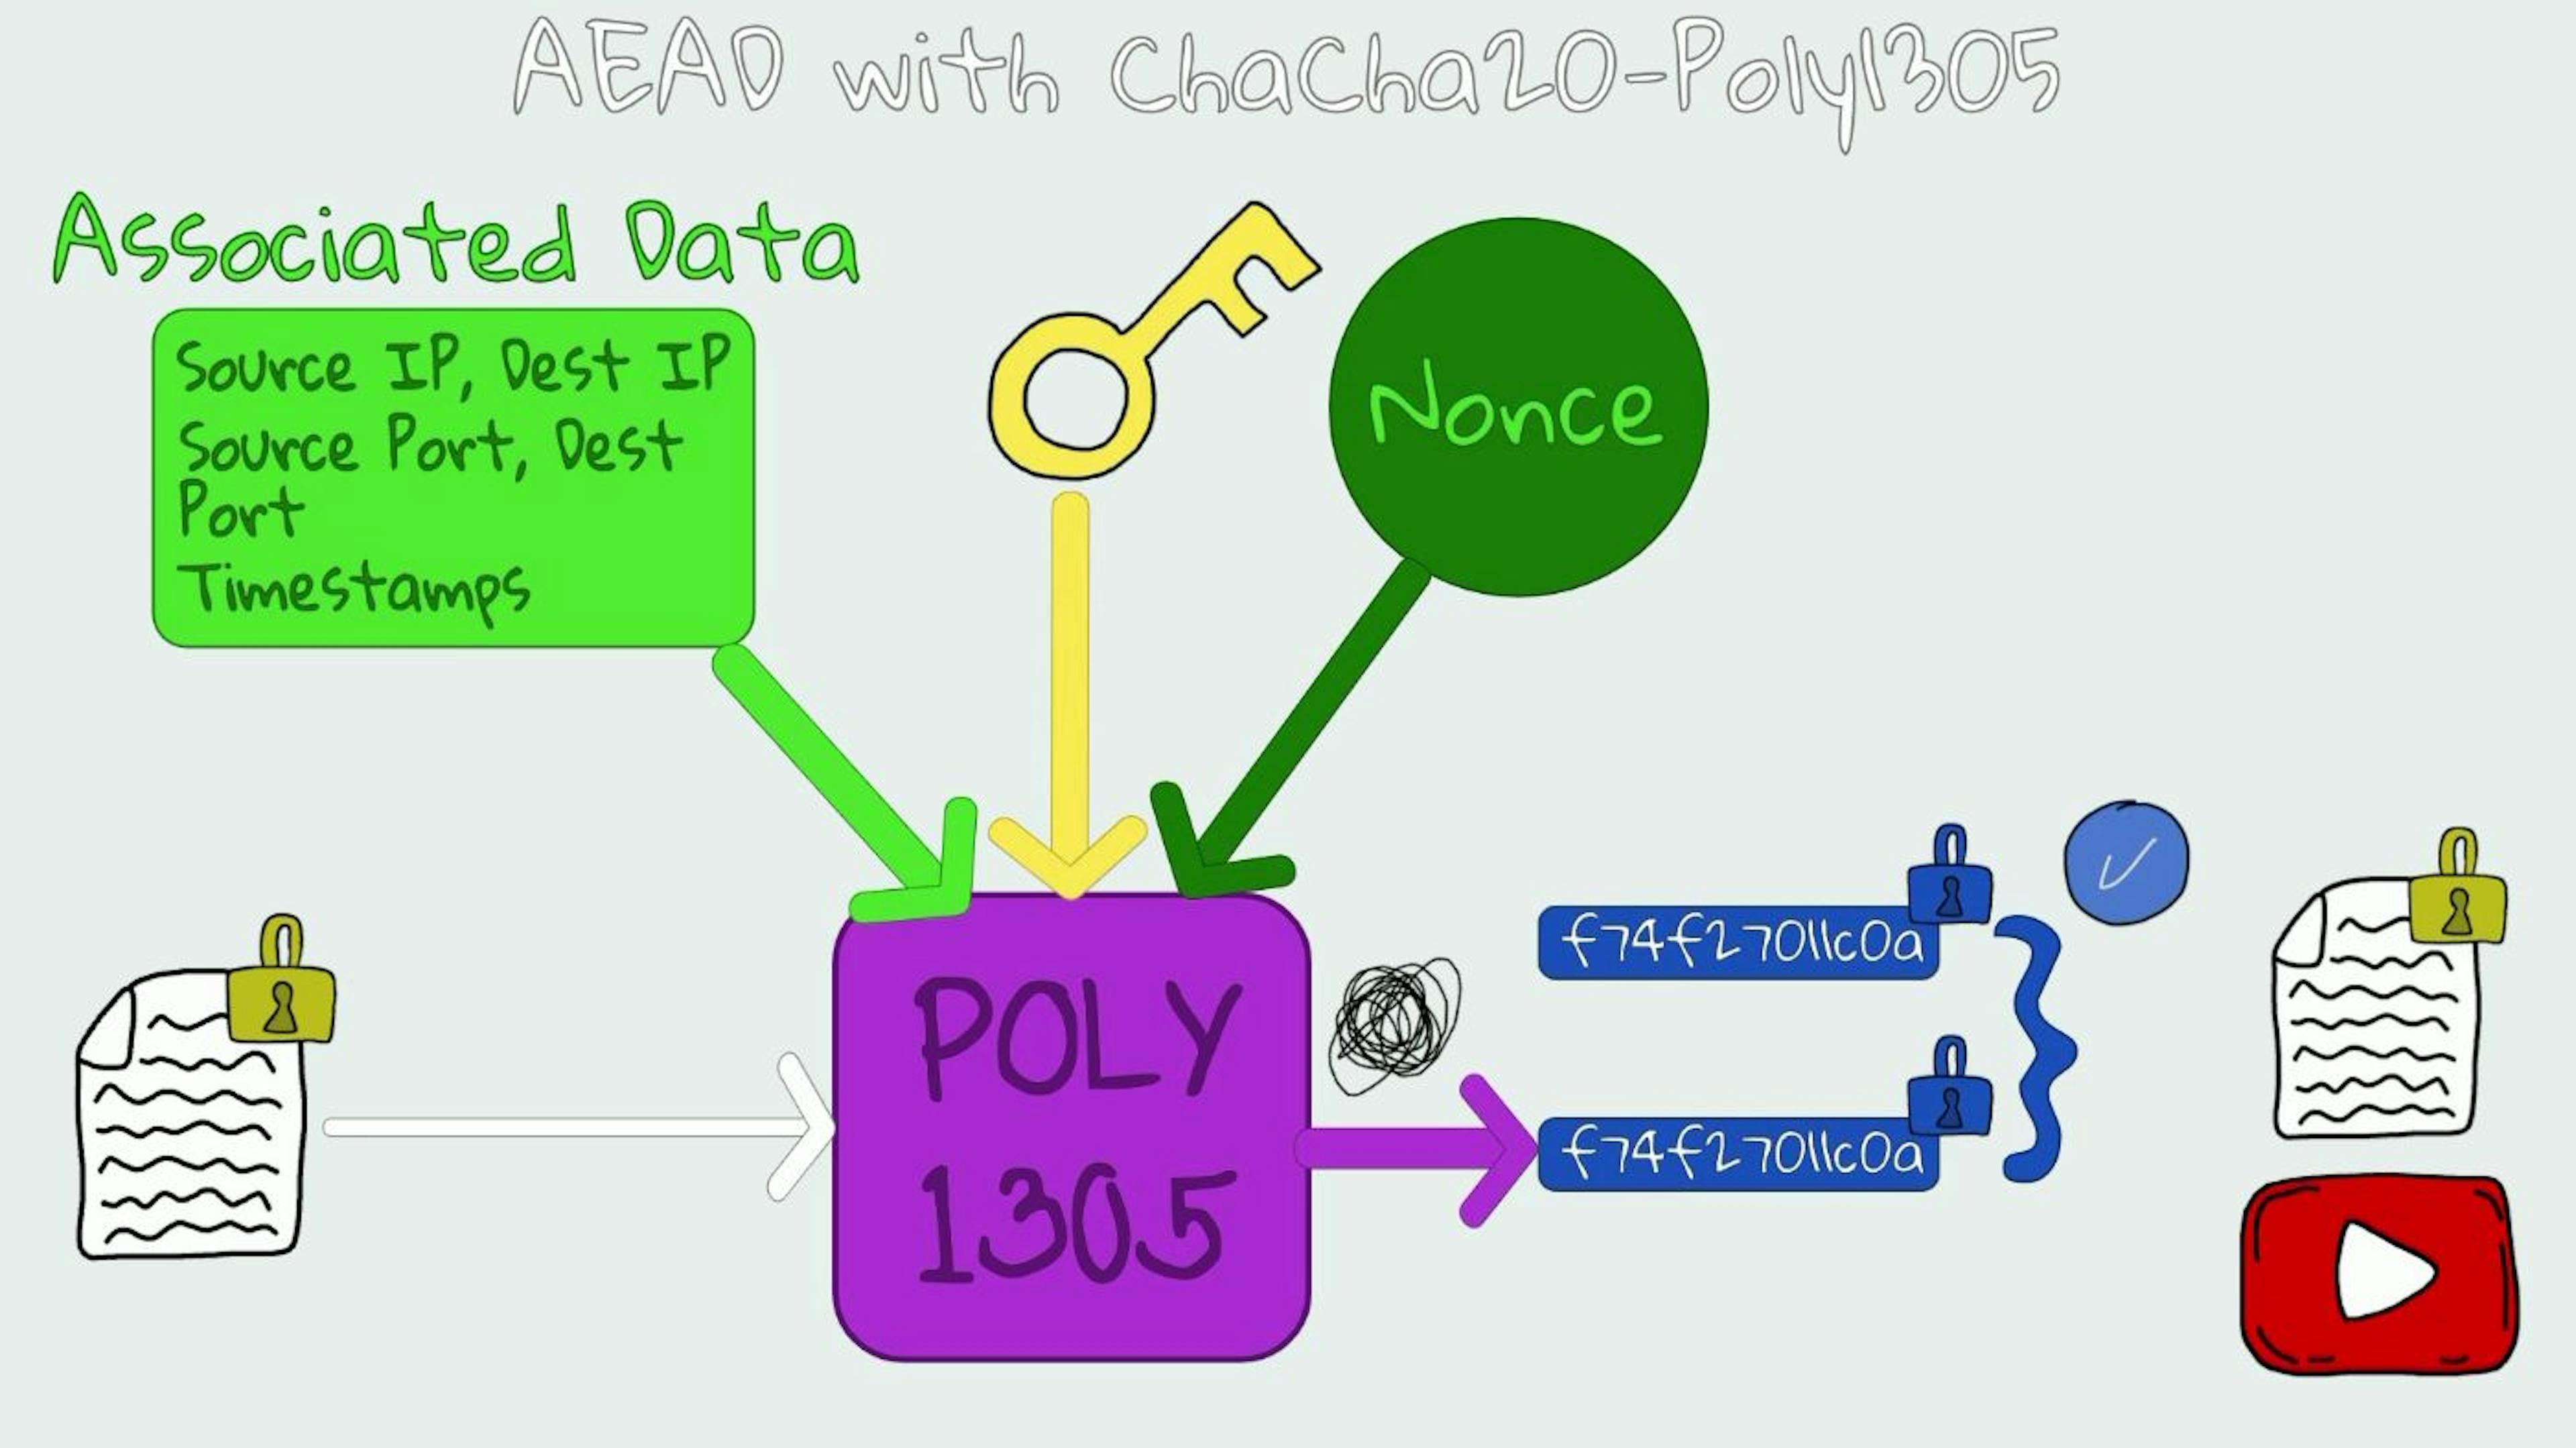 Verification in AEAD with ChaCha20-Poly1305